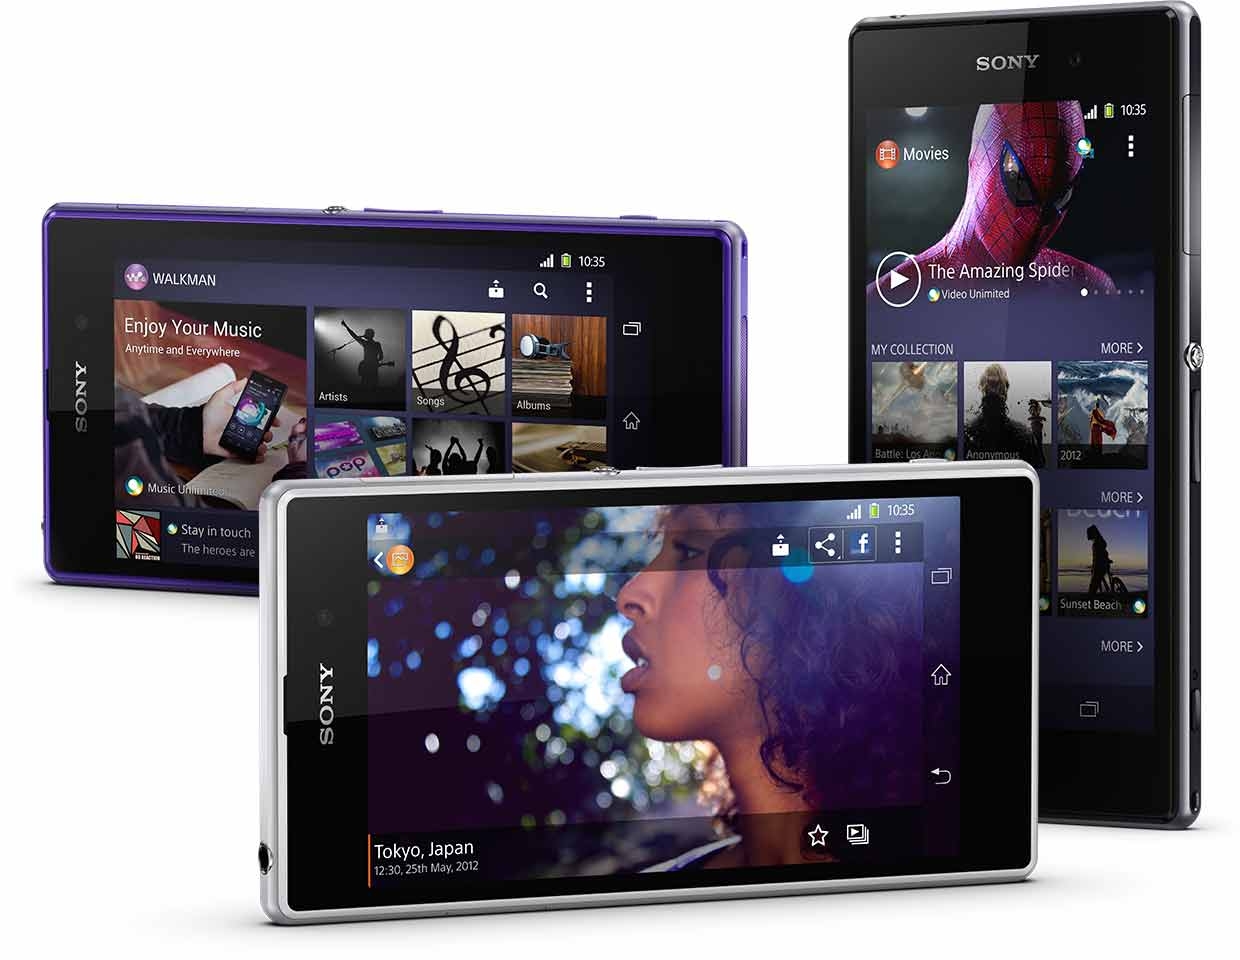 Youll find Sonys media apps  the WALKMAN, Movies and Album apps - on your Xperia Z1 homescreen.